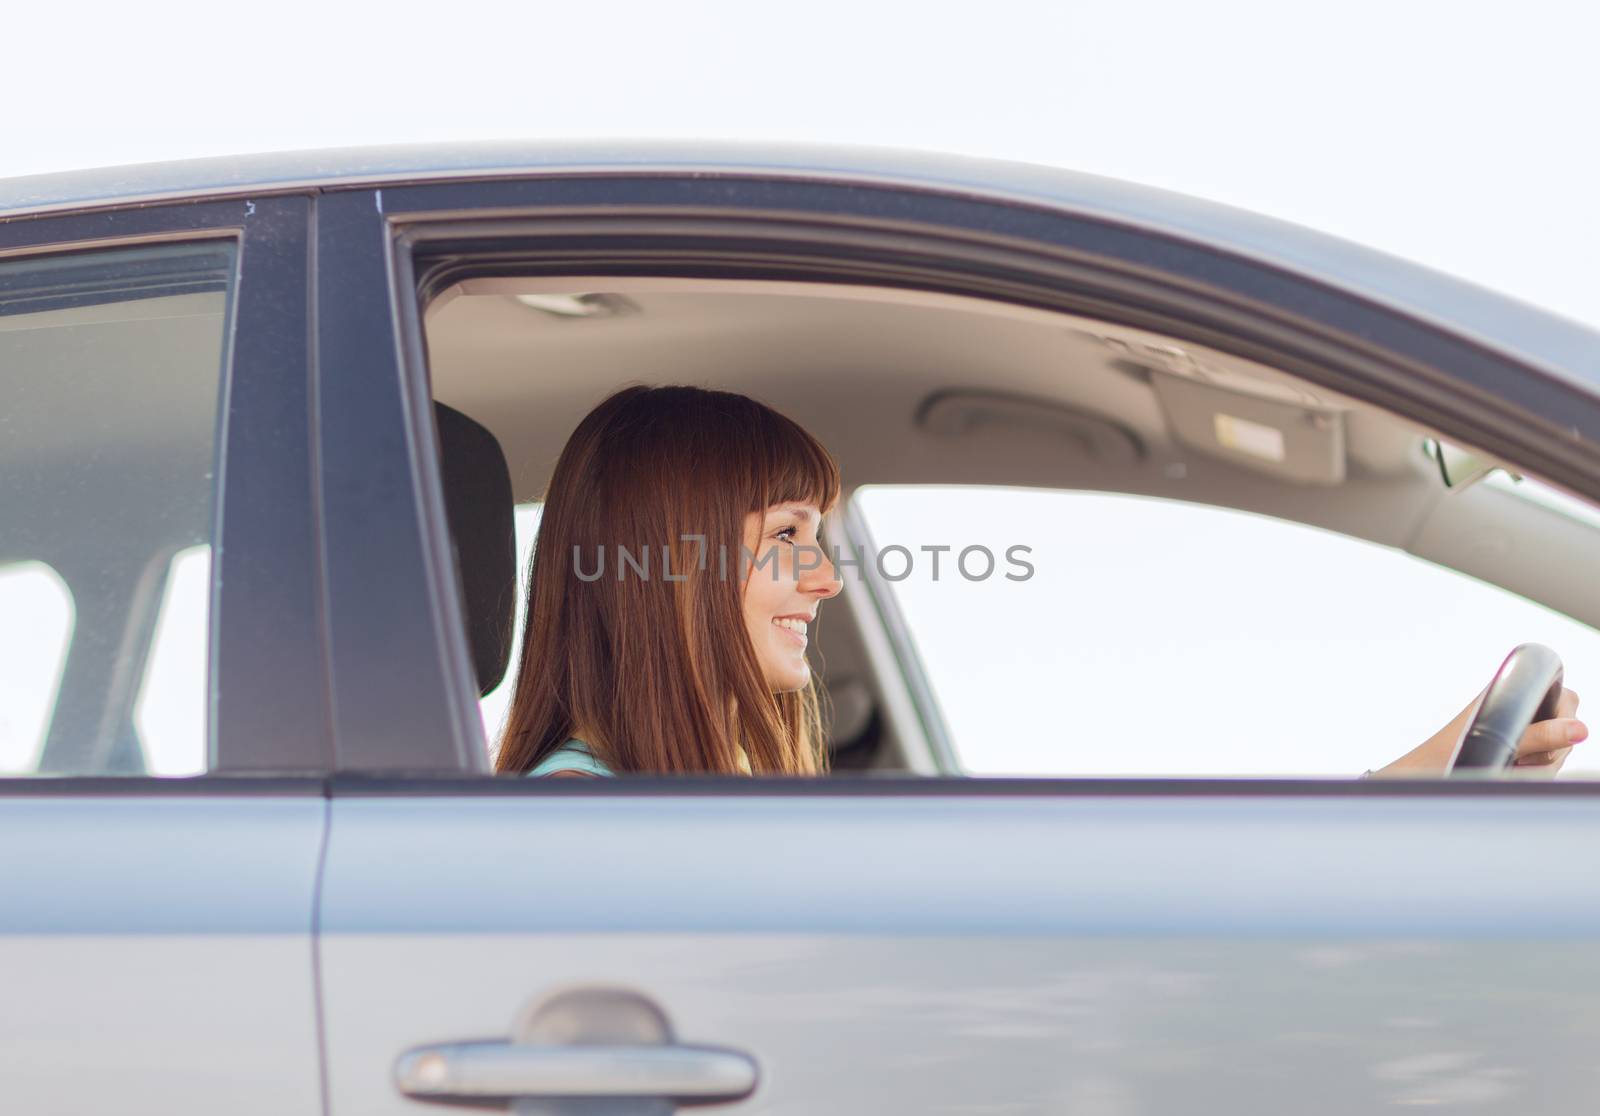 transportation and vehicle concept - happy woman driving a car